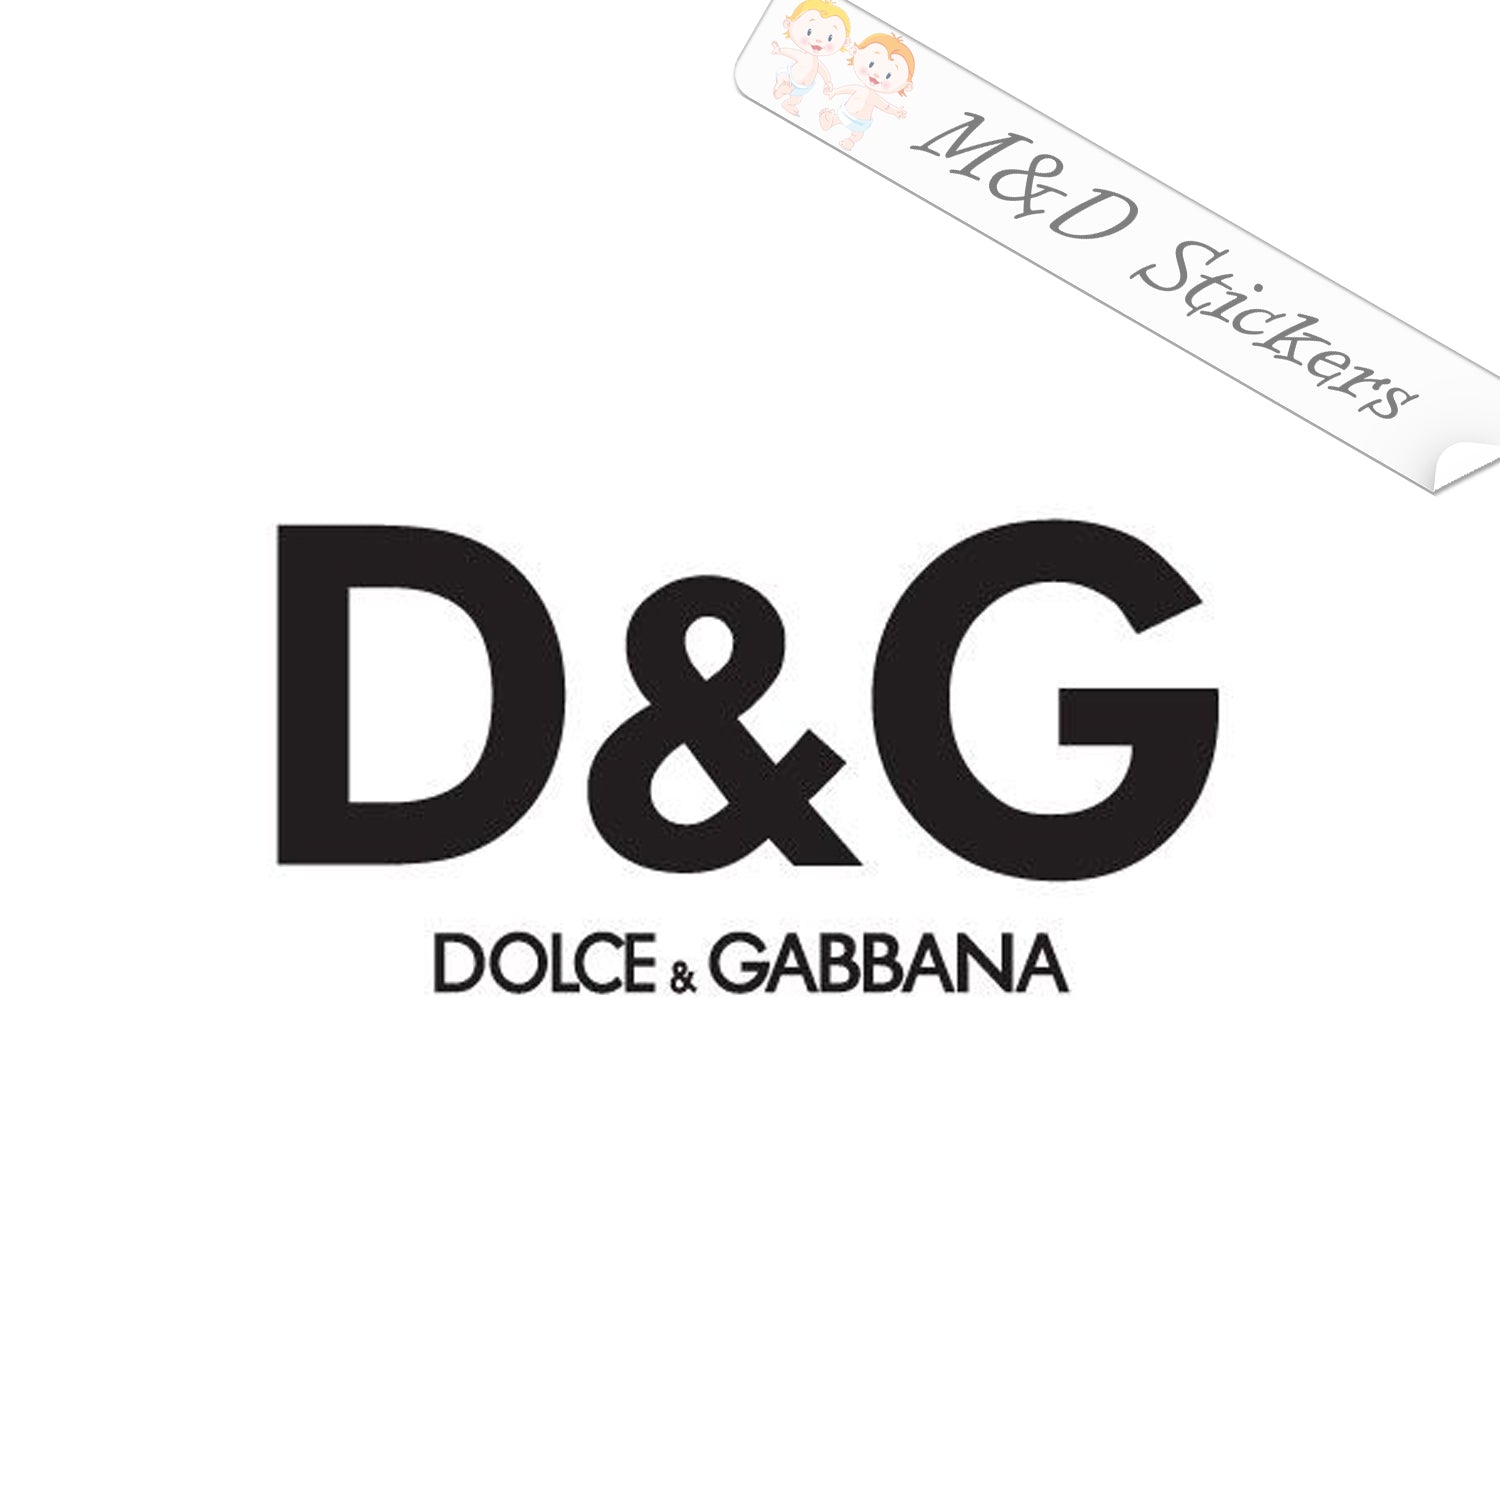 dolce and gabbana competitors